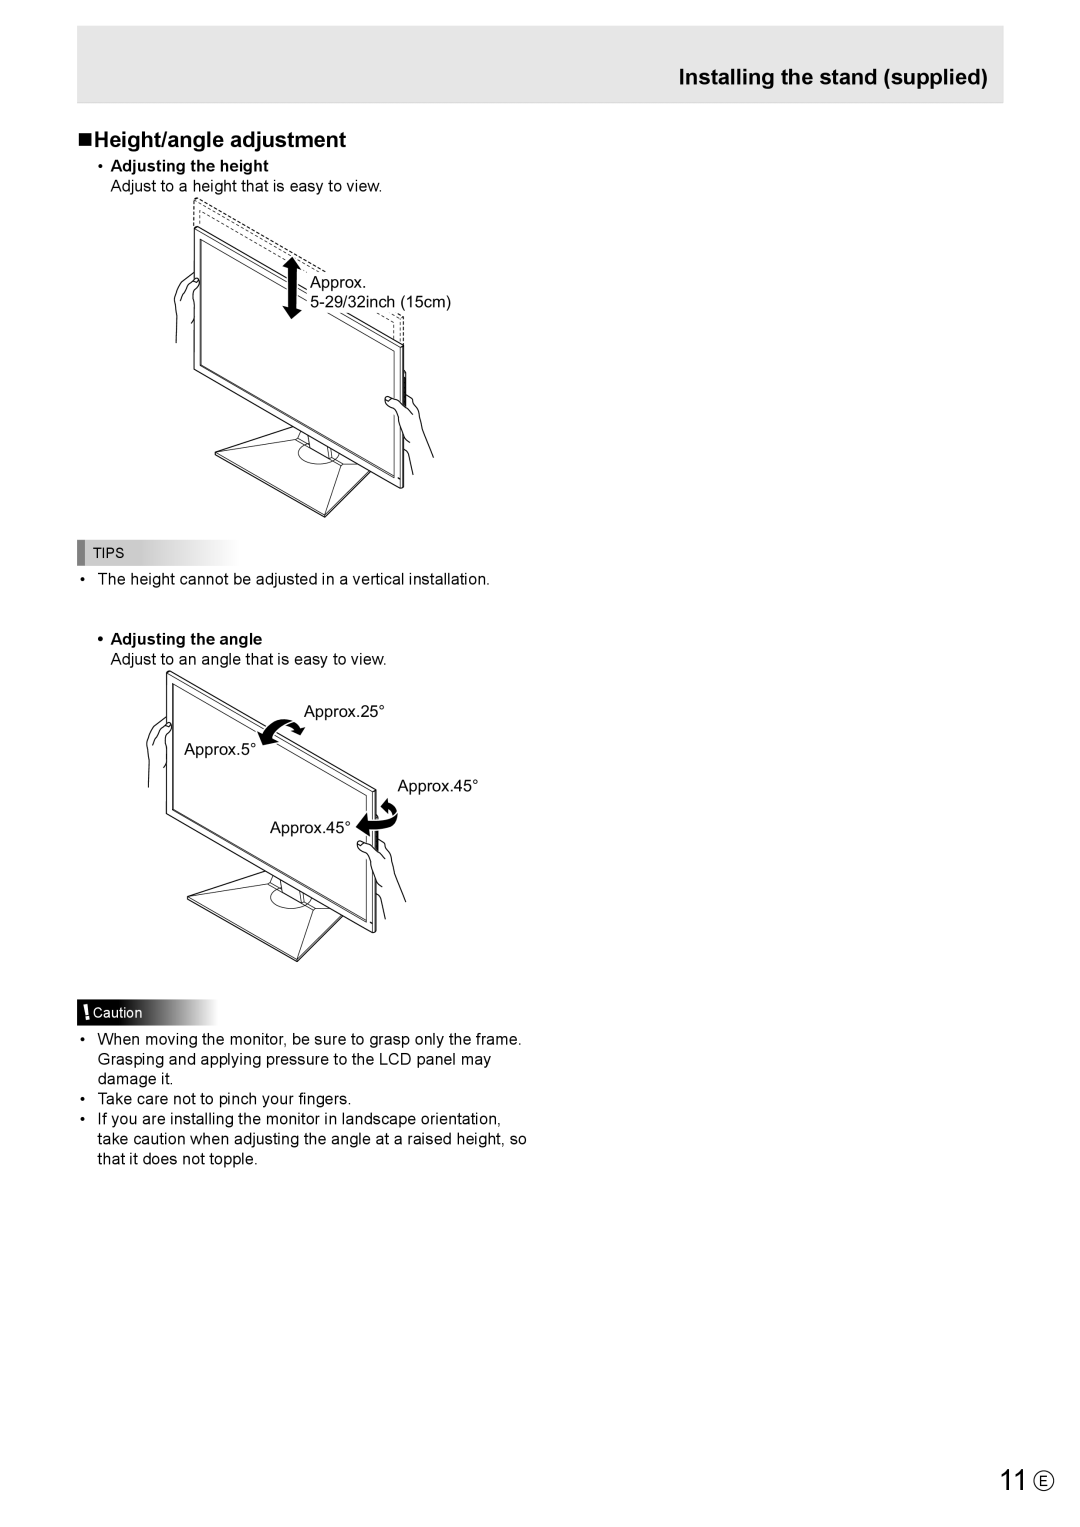 Sharp PN-K321 operation manual 11 E, Installing the stand supplied nHeight/angle adjustment 